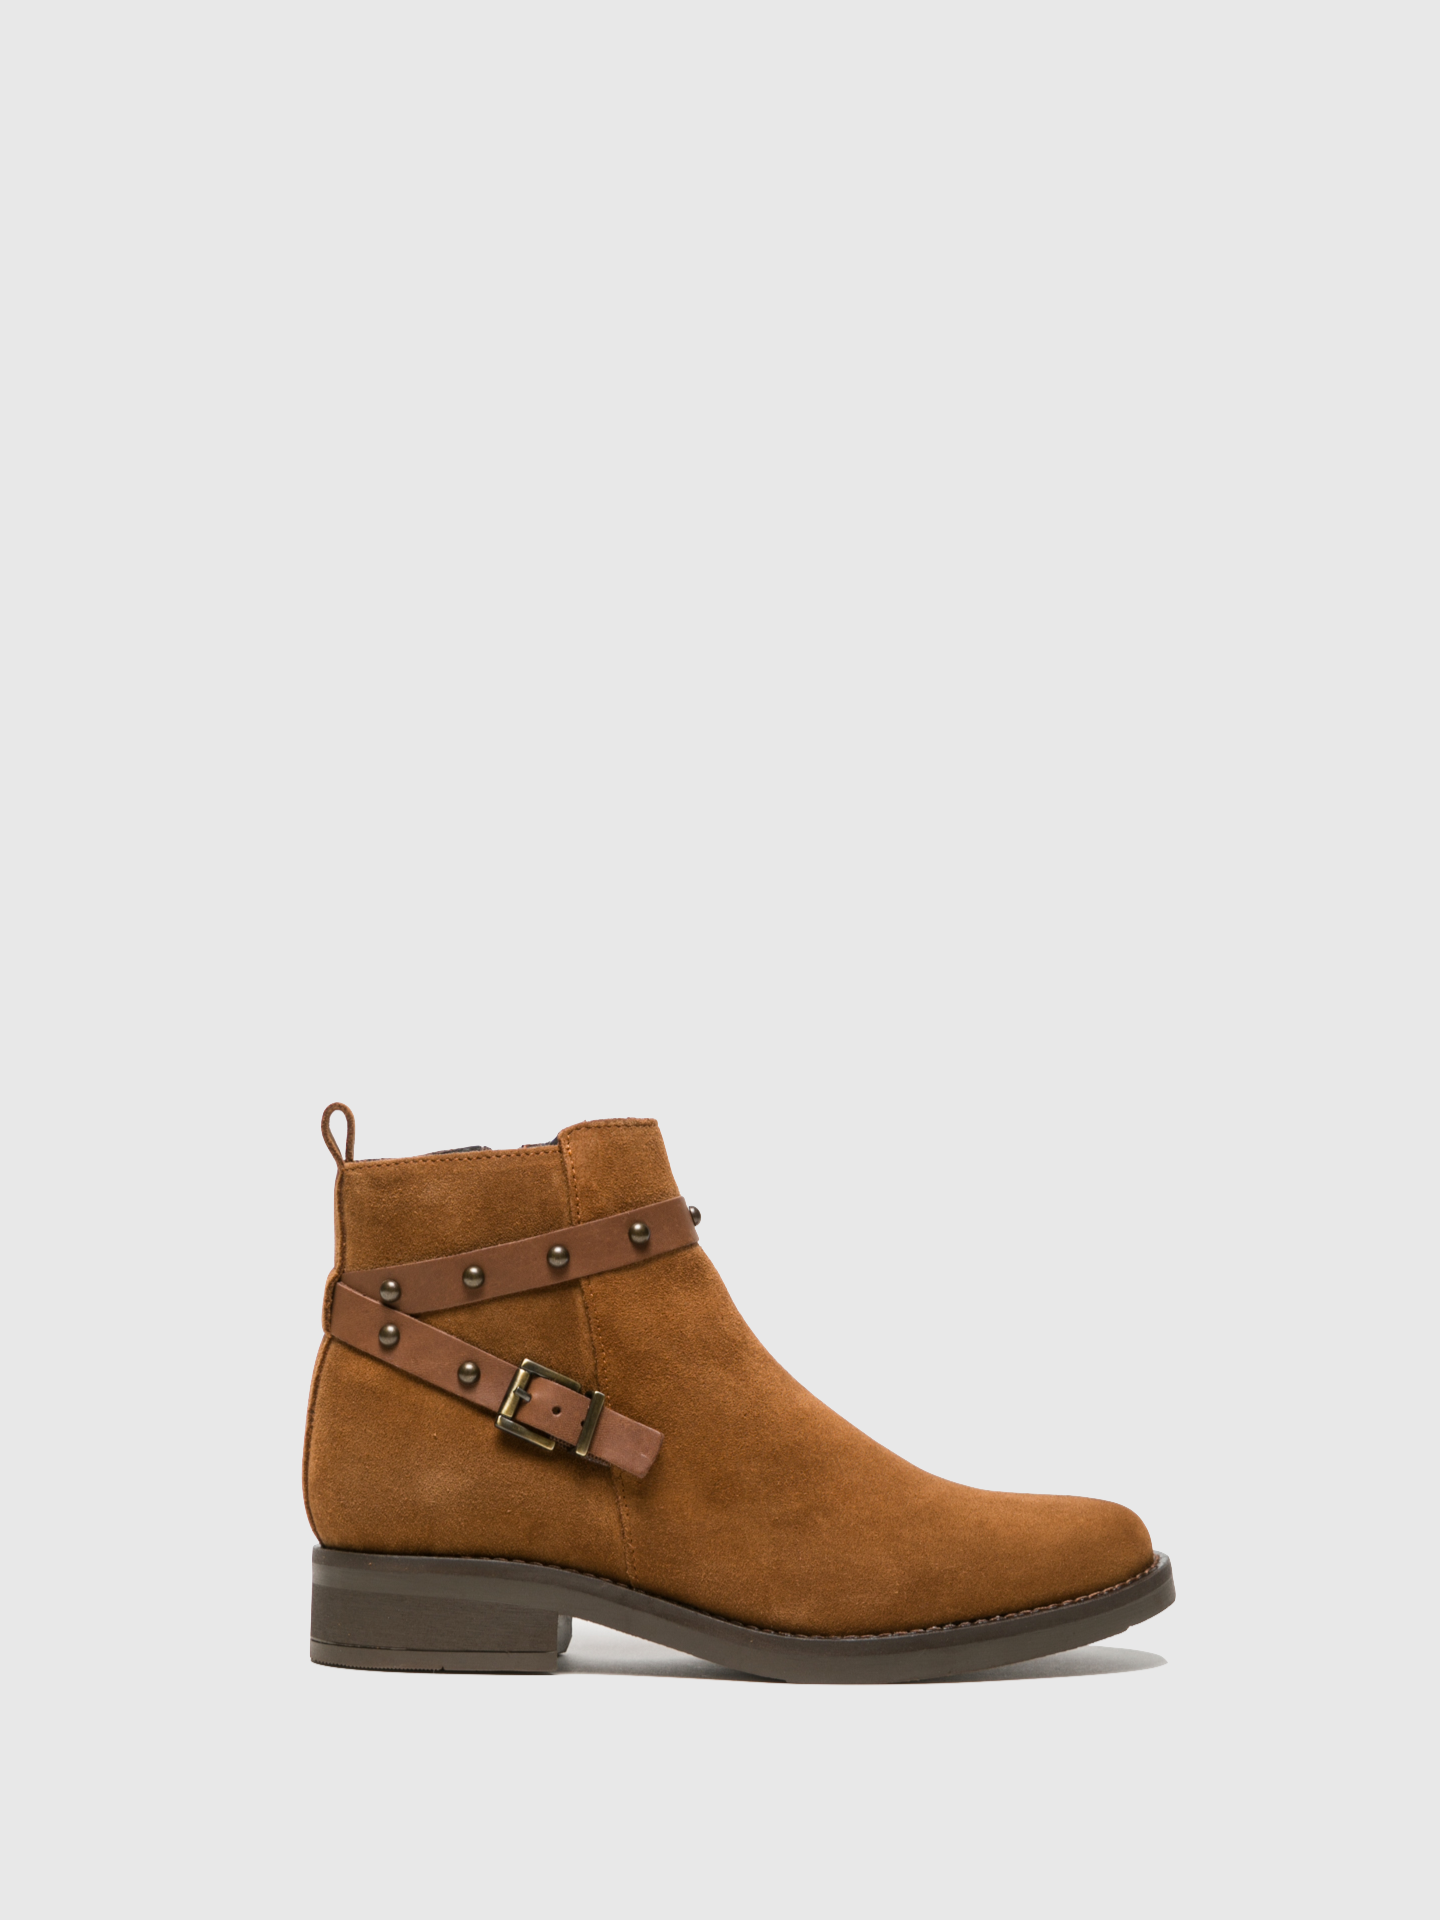 Foreva Peru Buckle Ankle Boots